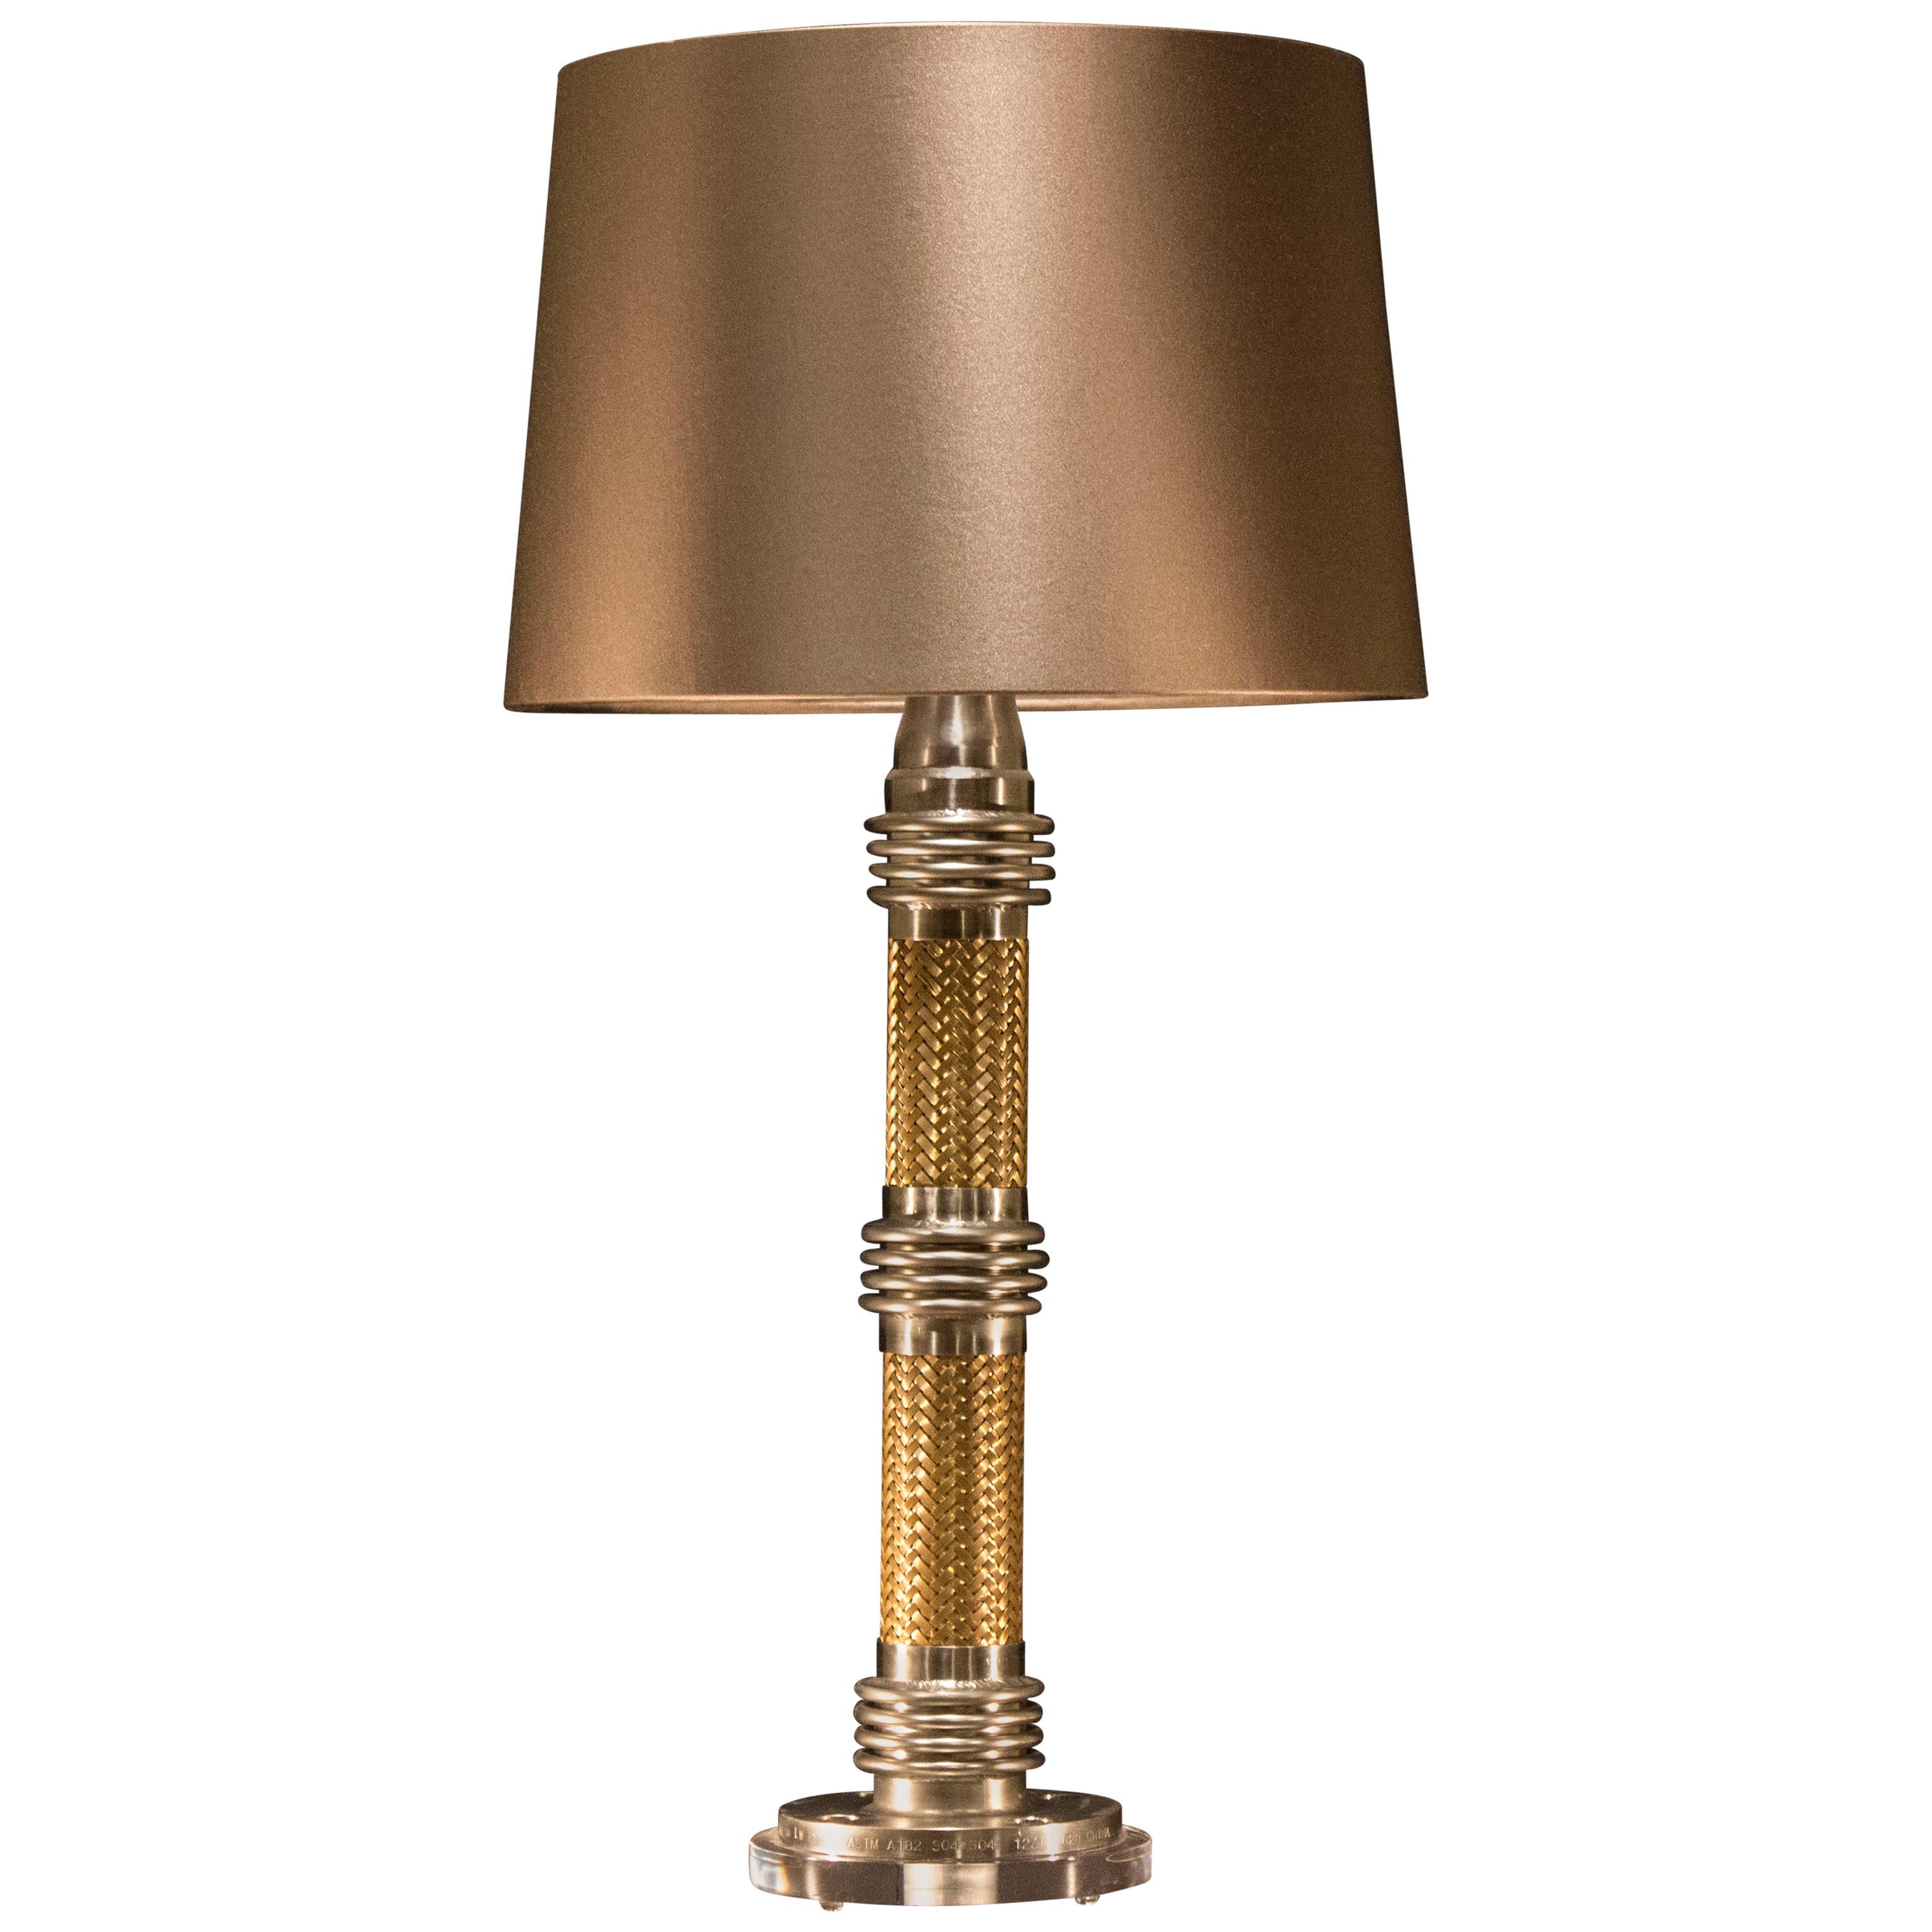 Modern Industrial Table Lamp 'Nebeaune' For Sale